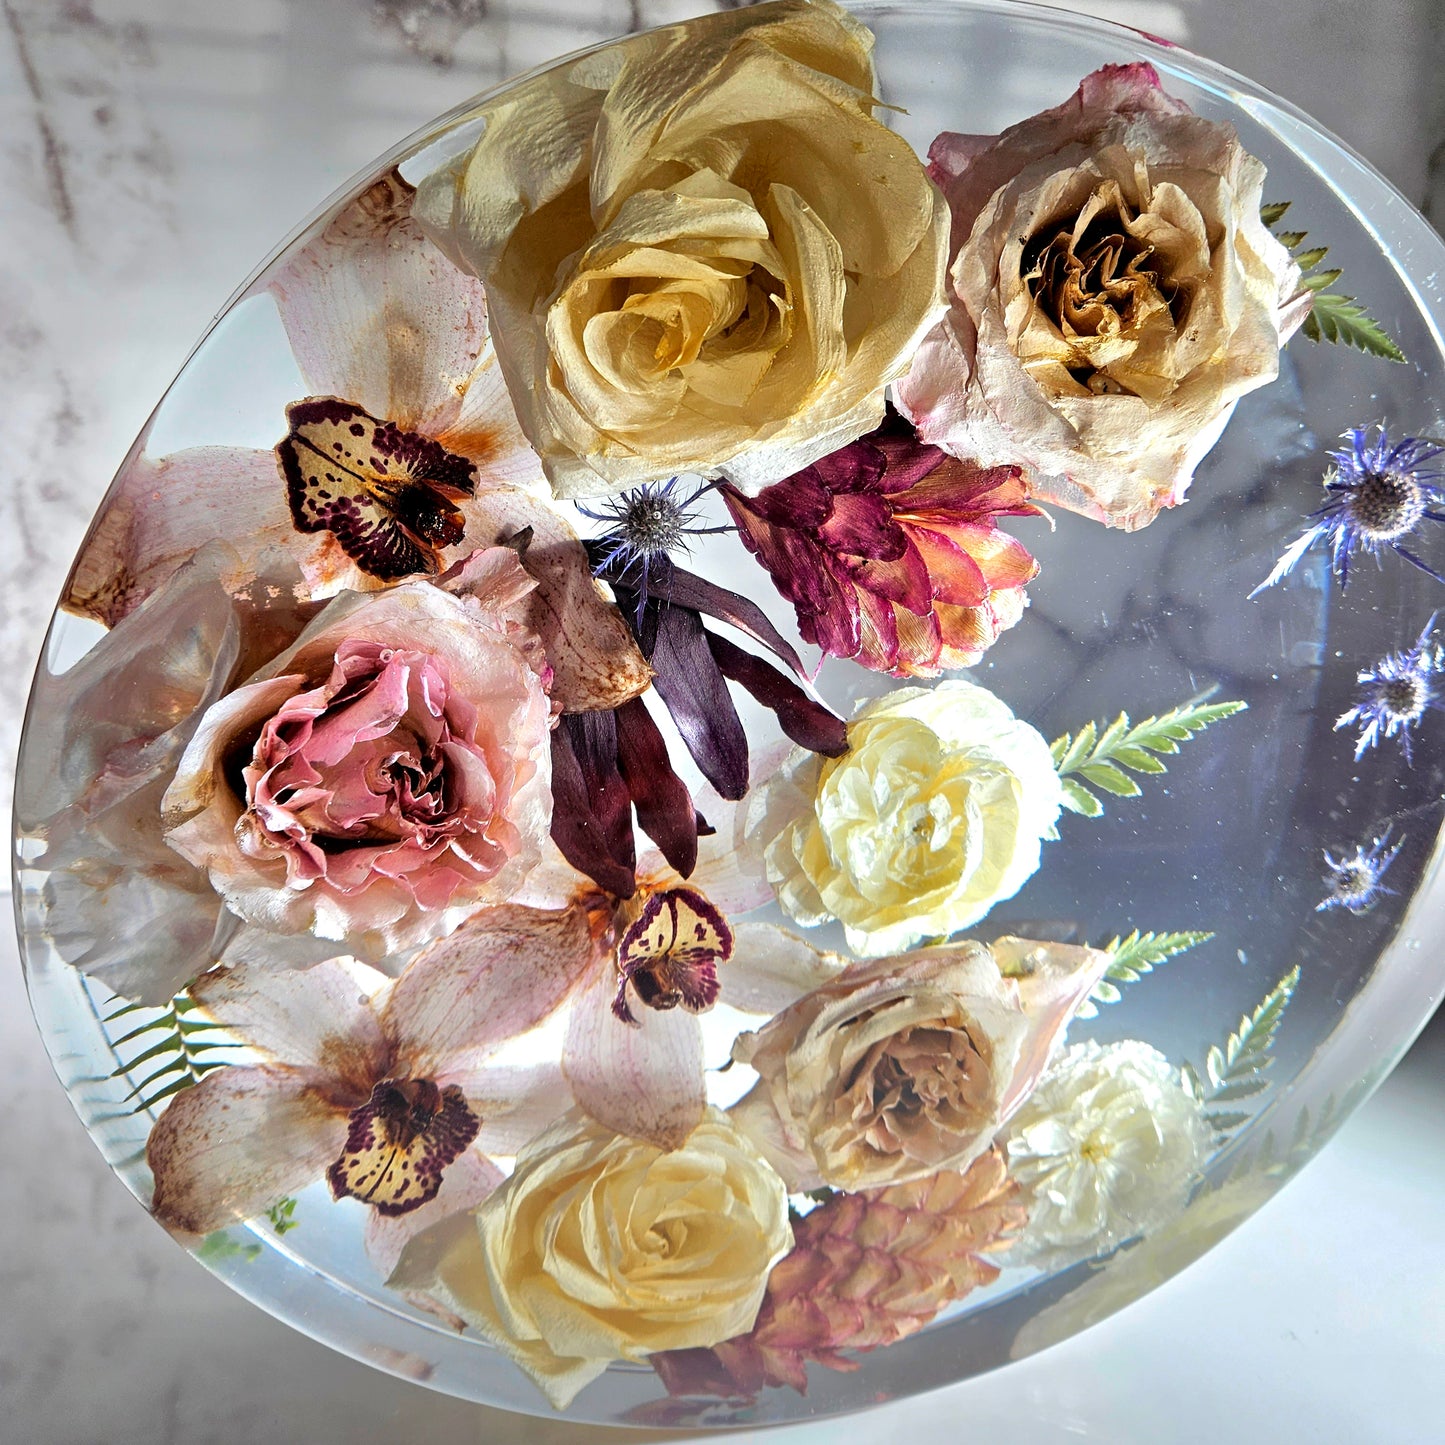 Large 14" Round 3D Resin Wedding Bouquet Preservation Keepsake Gift Save Your Wedding Flowers Forever